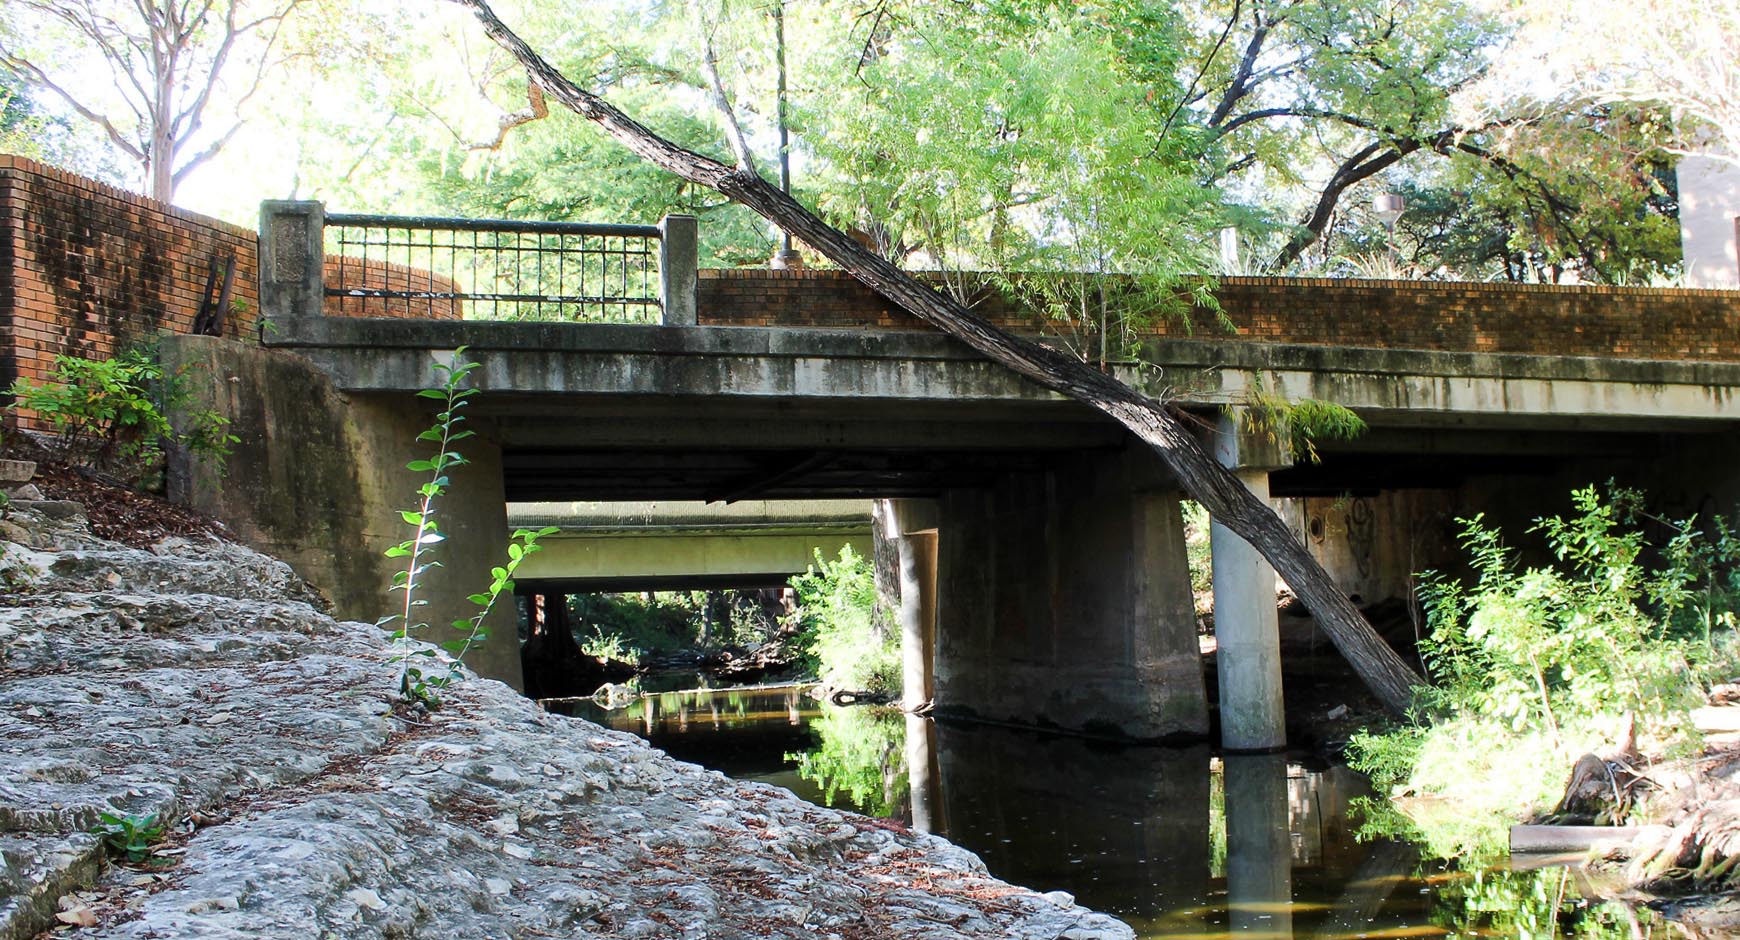 View from USGS Bridge looking south